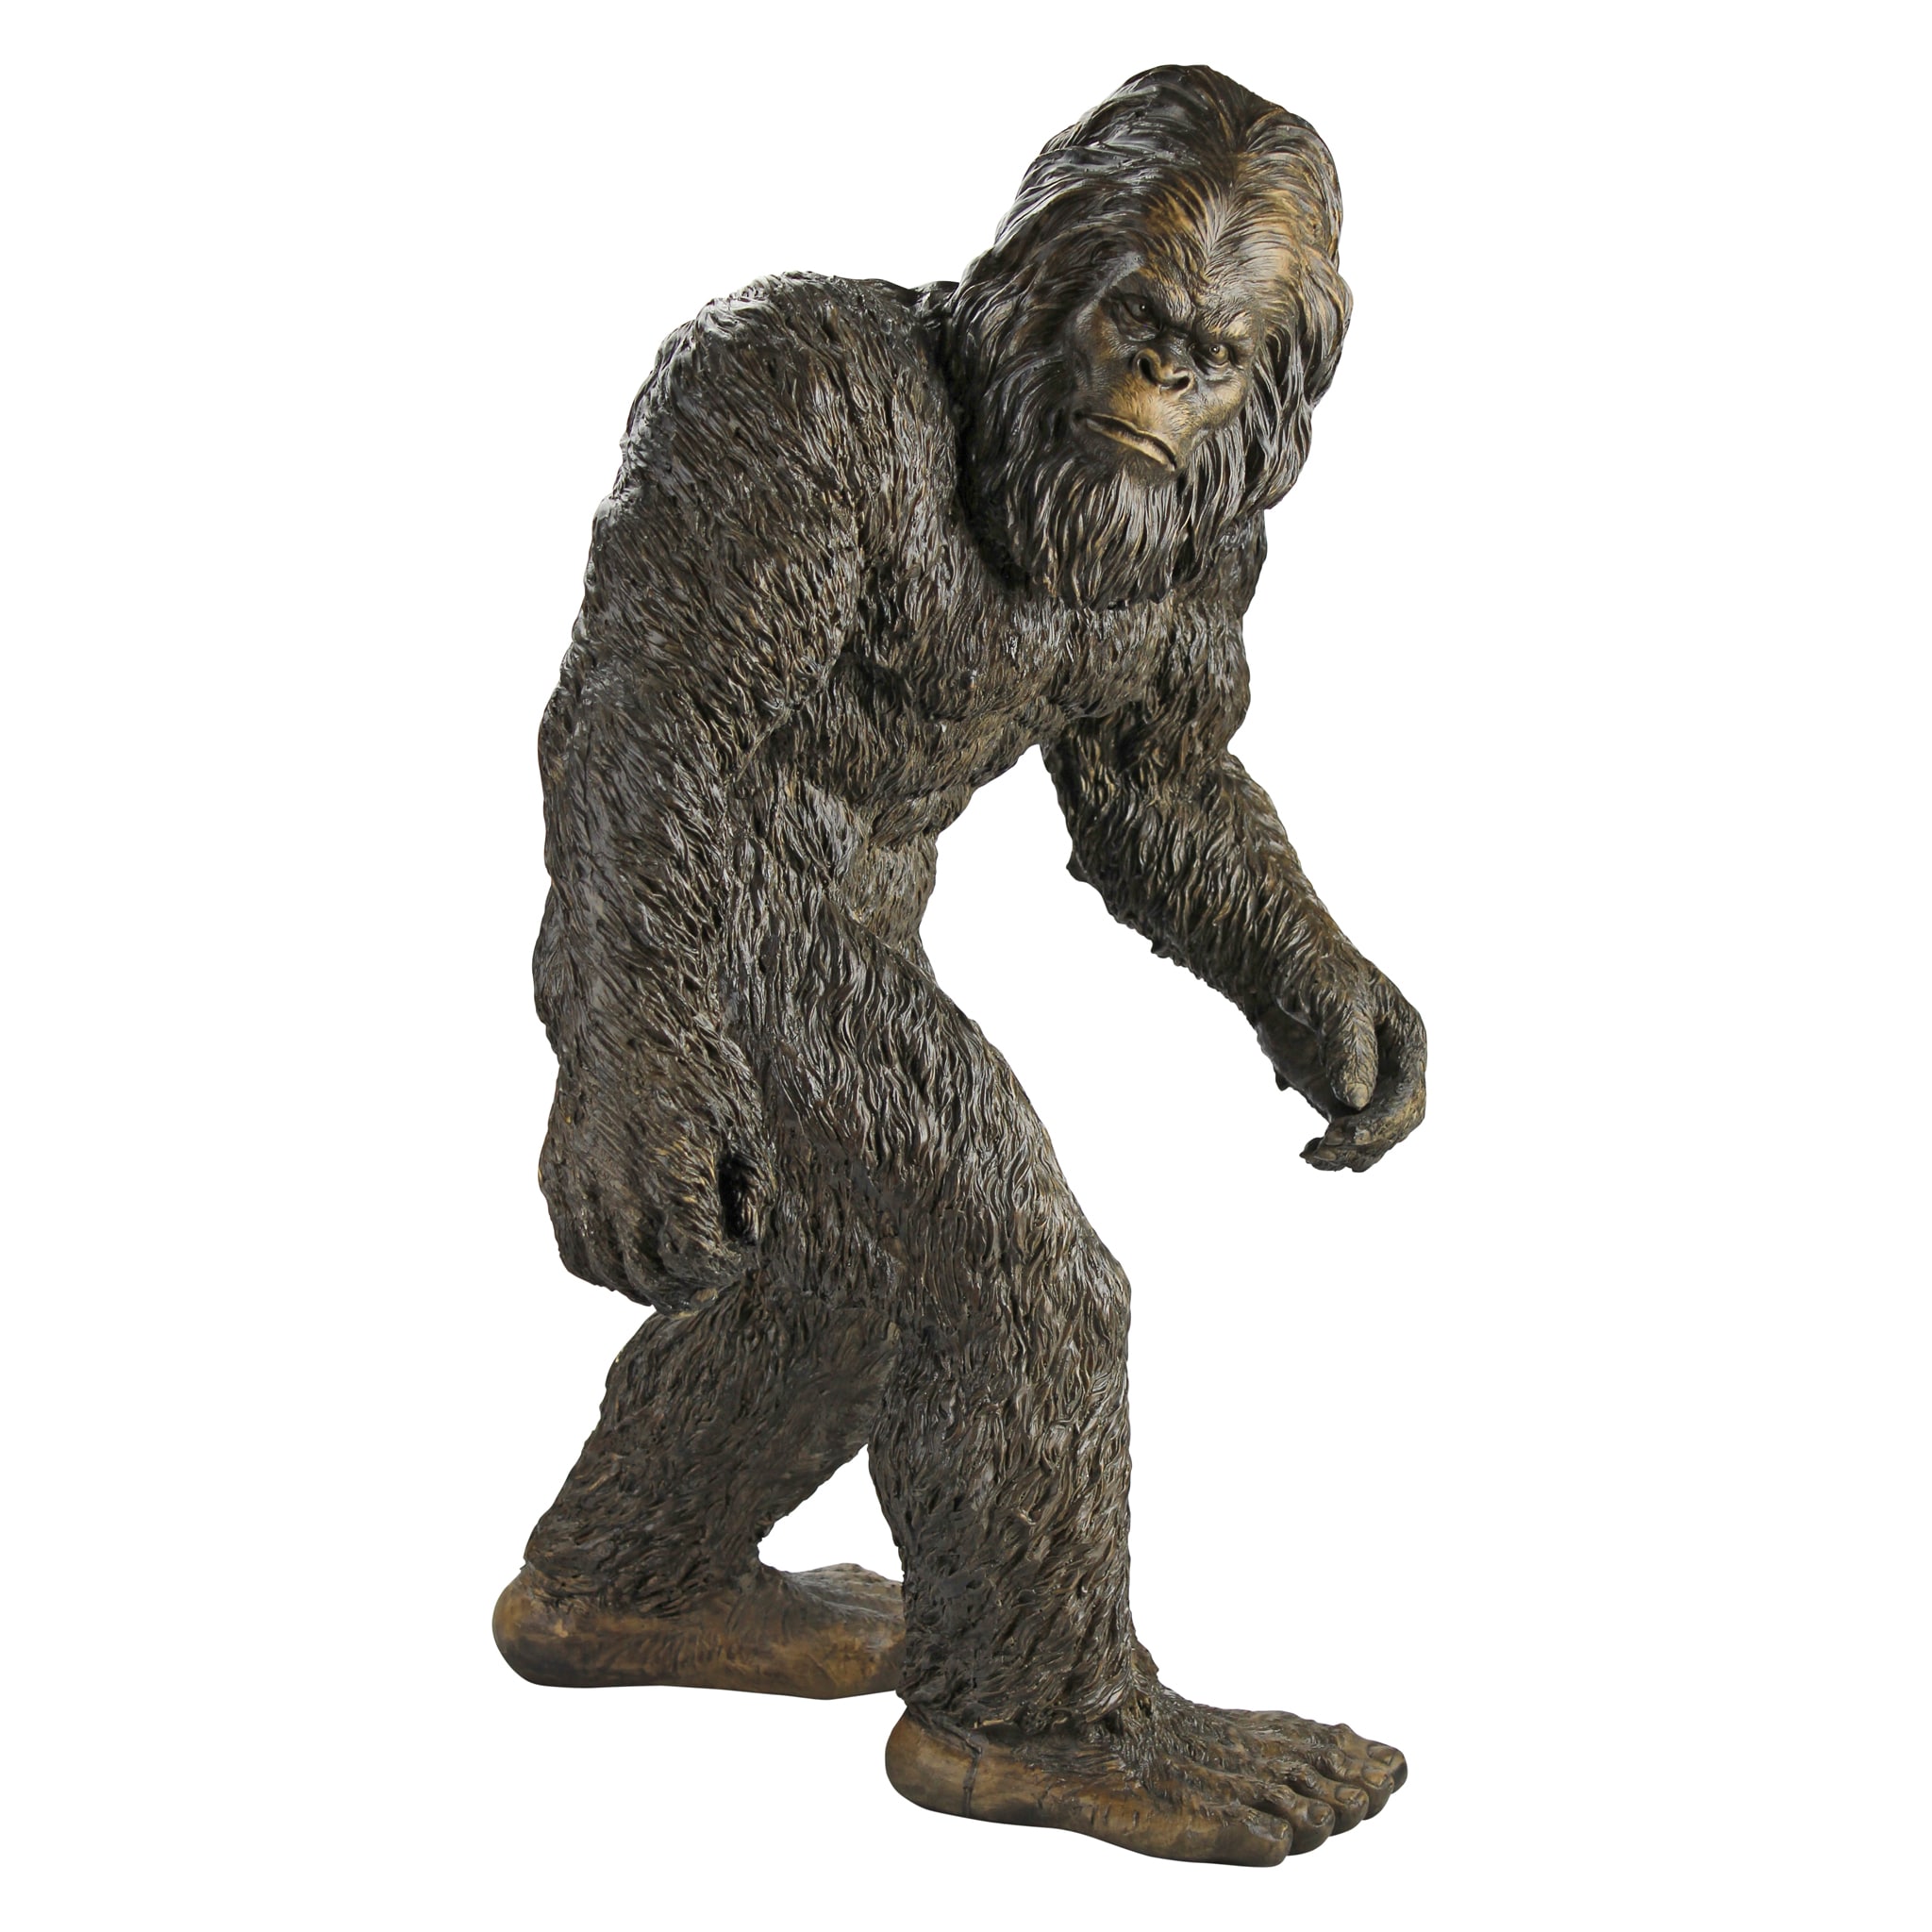 Design Toscano Abominable Snowman Yeti - Large, Multicolored